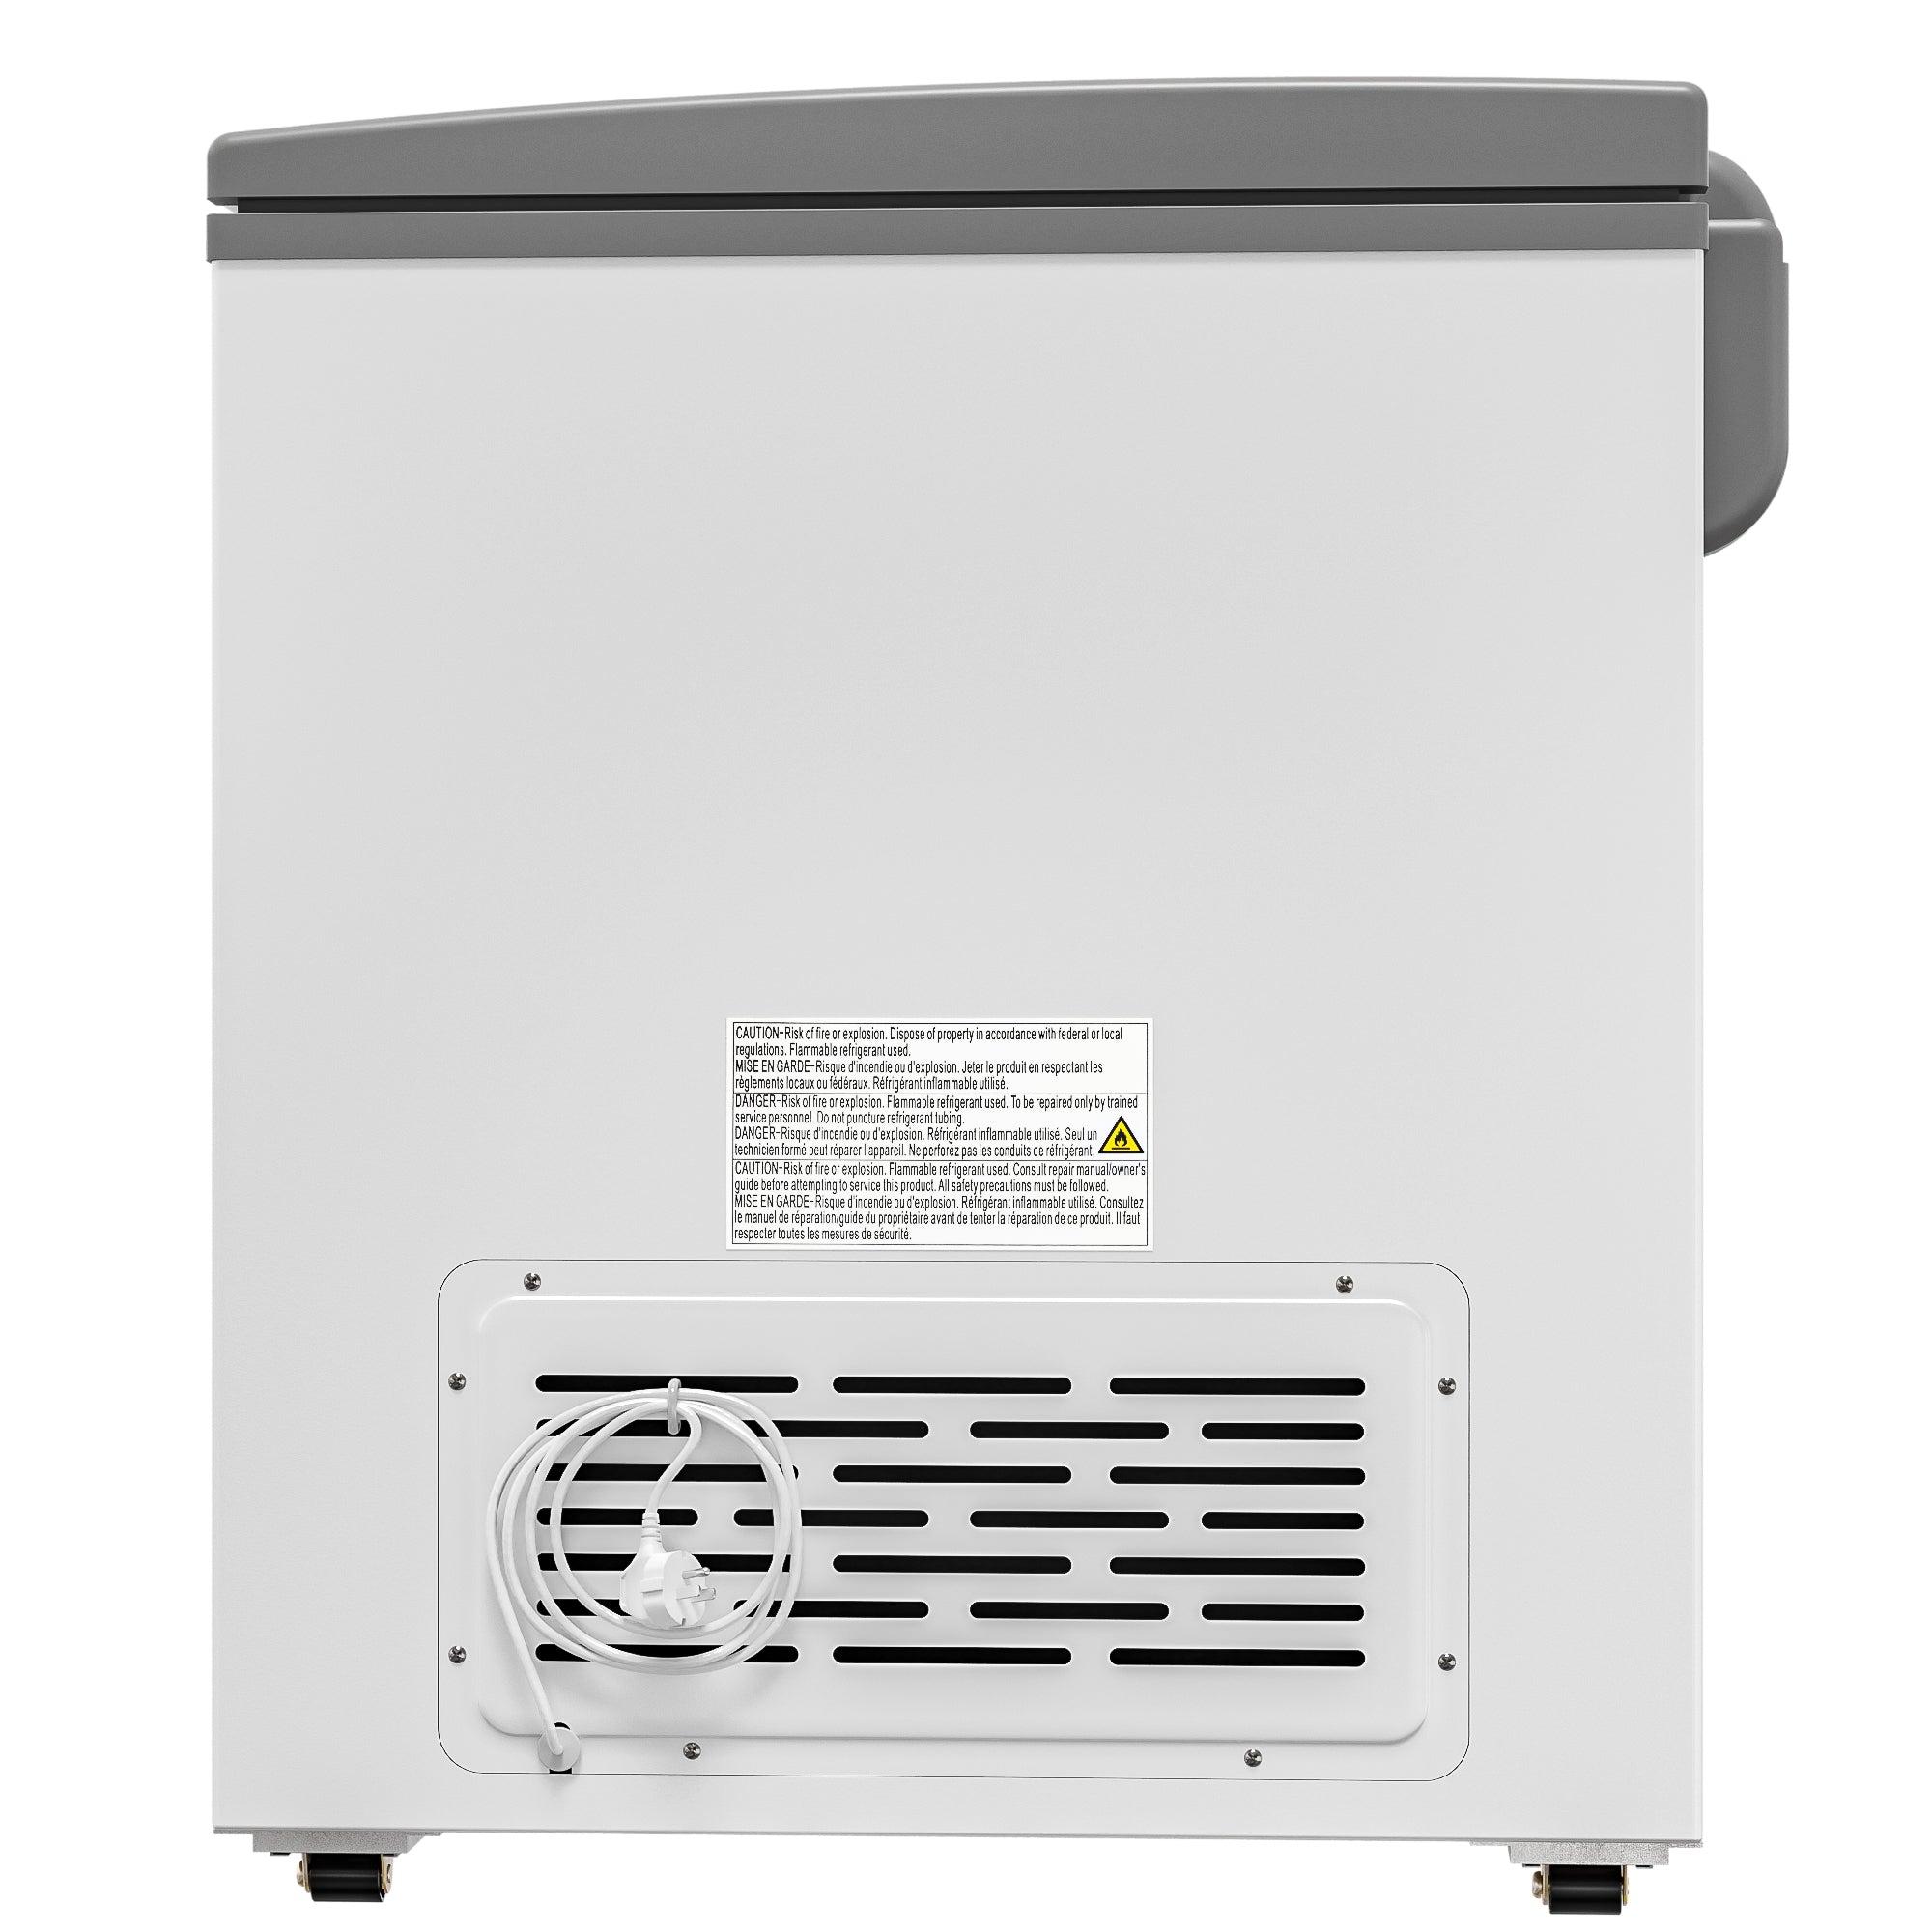 Koolmore 10 Cu. ft. Manual Defrost Commercial Chest Freezer in White